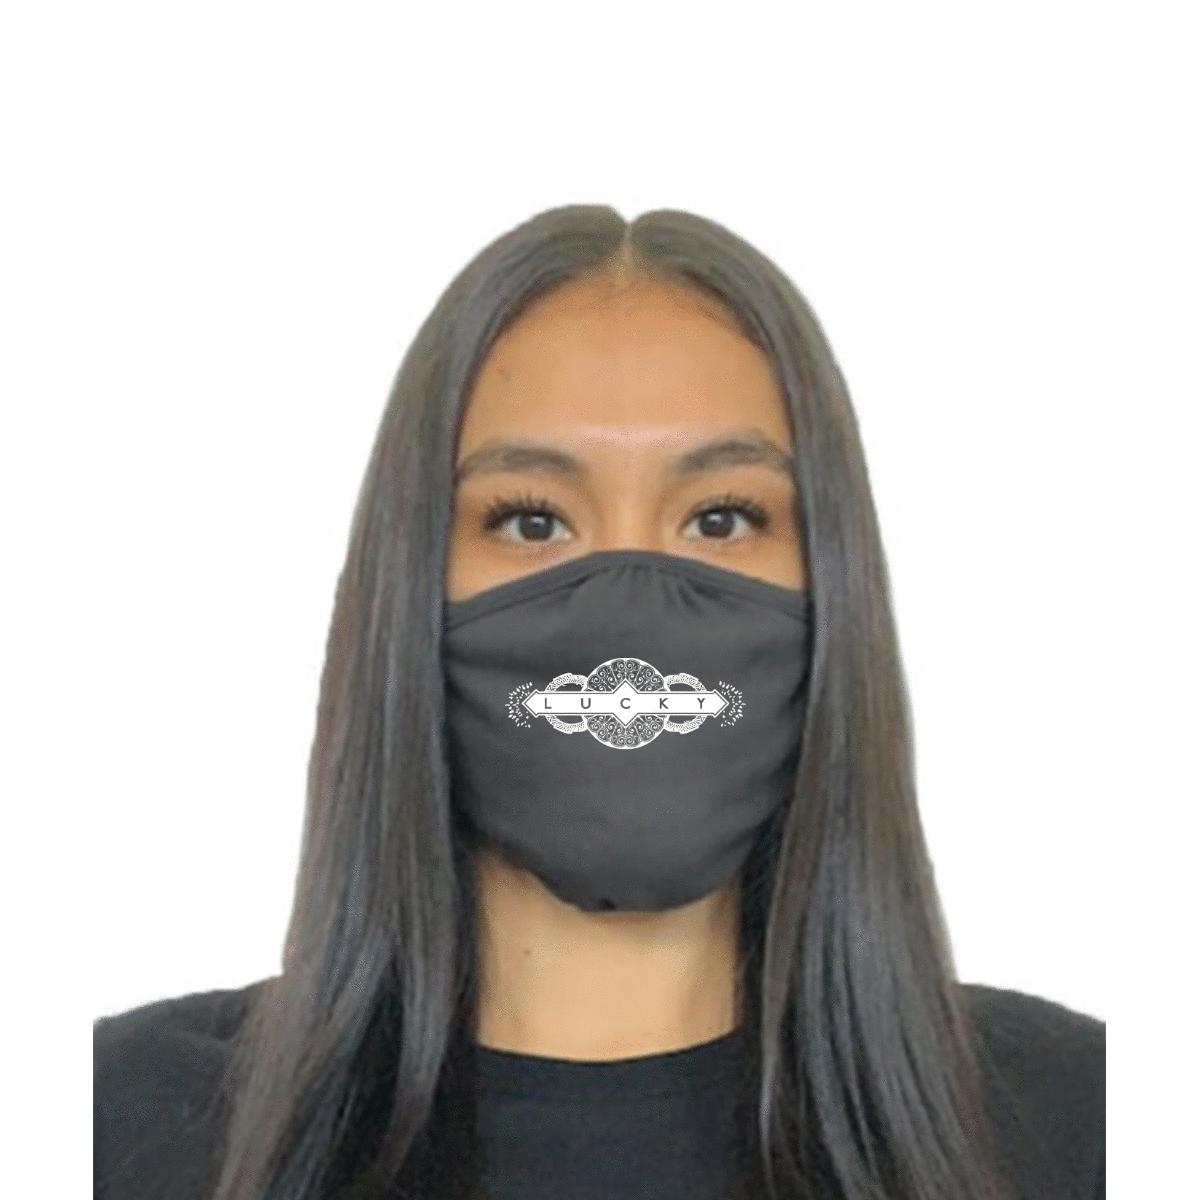 Press Press Merch - Virginia - Custom Face Mask - Restaurant logo printed on a face covering - Masks used by restaurant staff